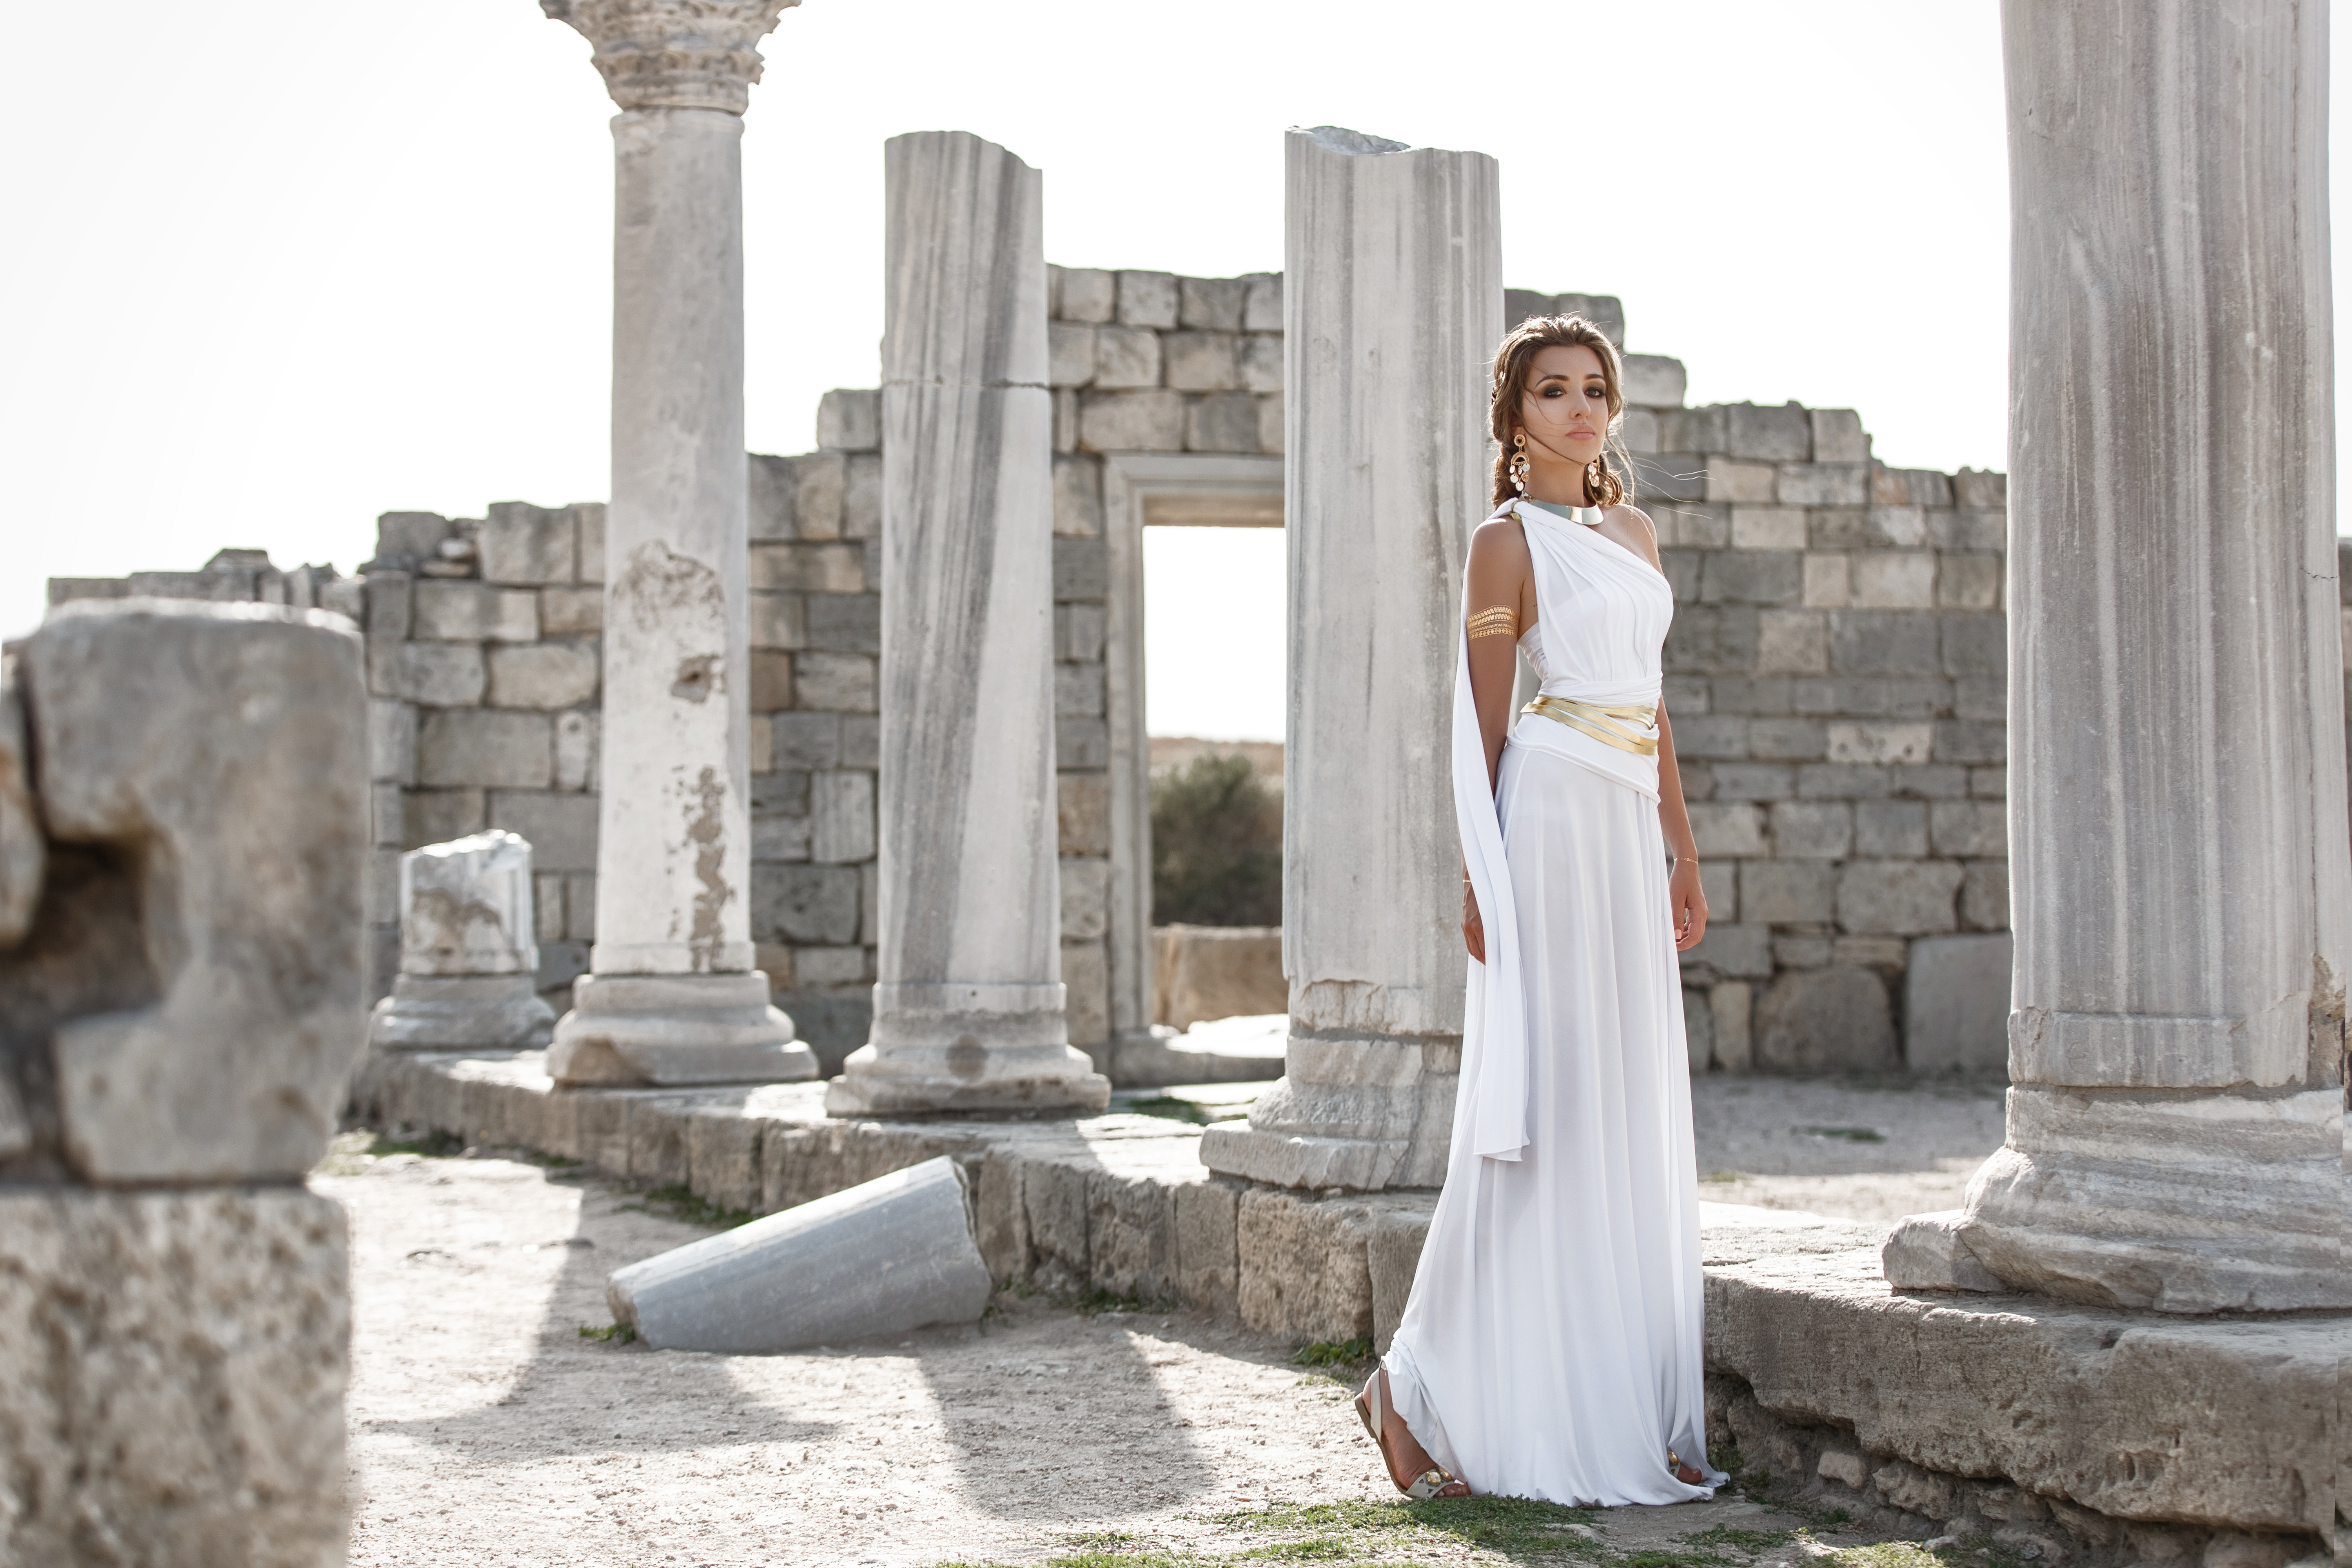 Goddess in a white dress surrounded by ancient ruins